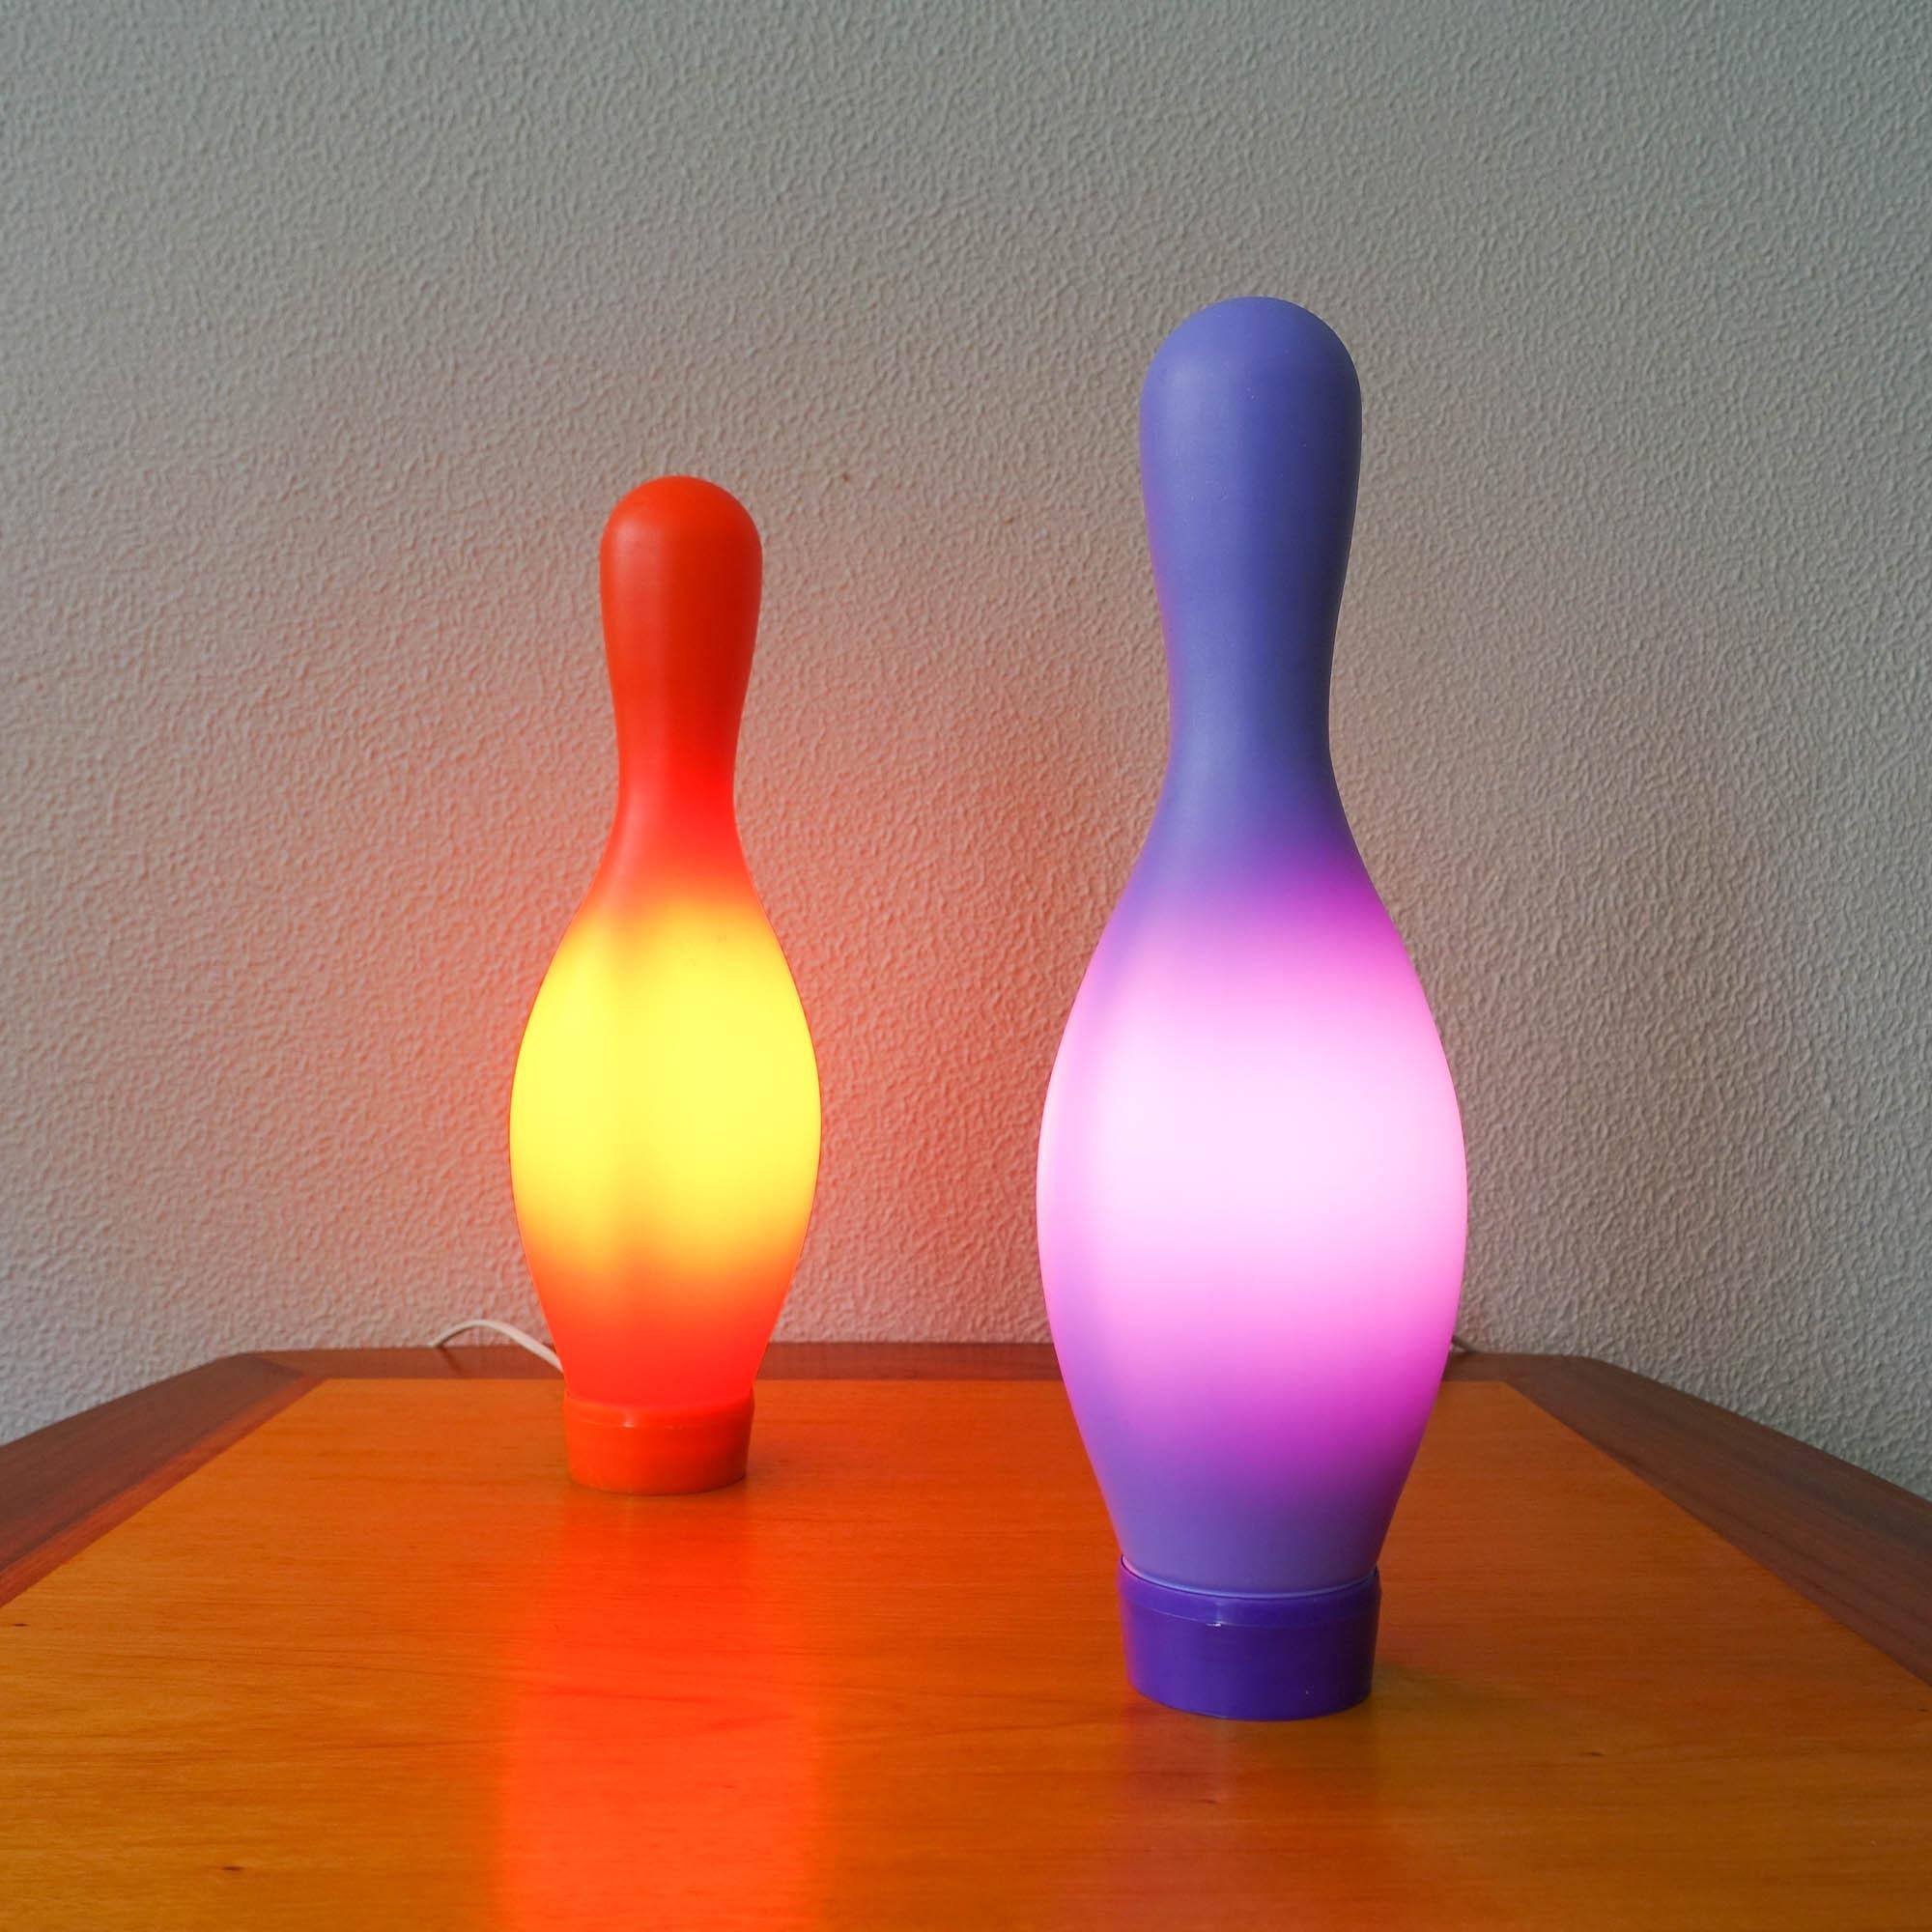 Pair of Knock-Off Table Lamp by Josh Owen for Bozart, 2002 In Good Condition For Sale In Lisboa, PT